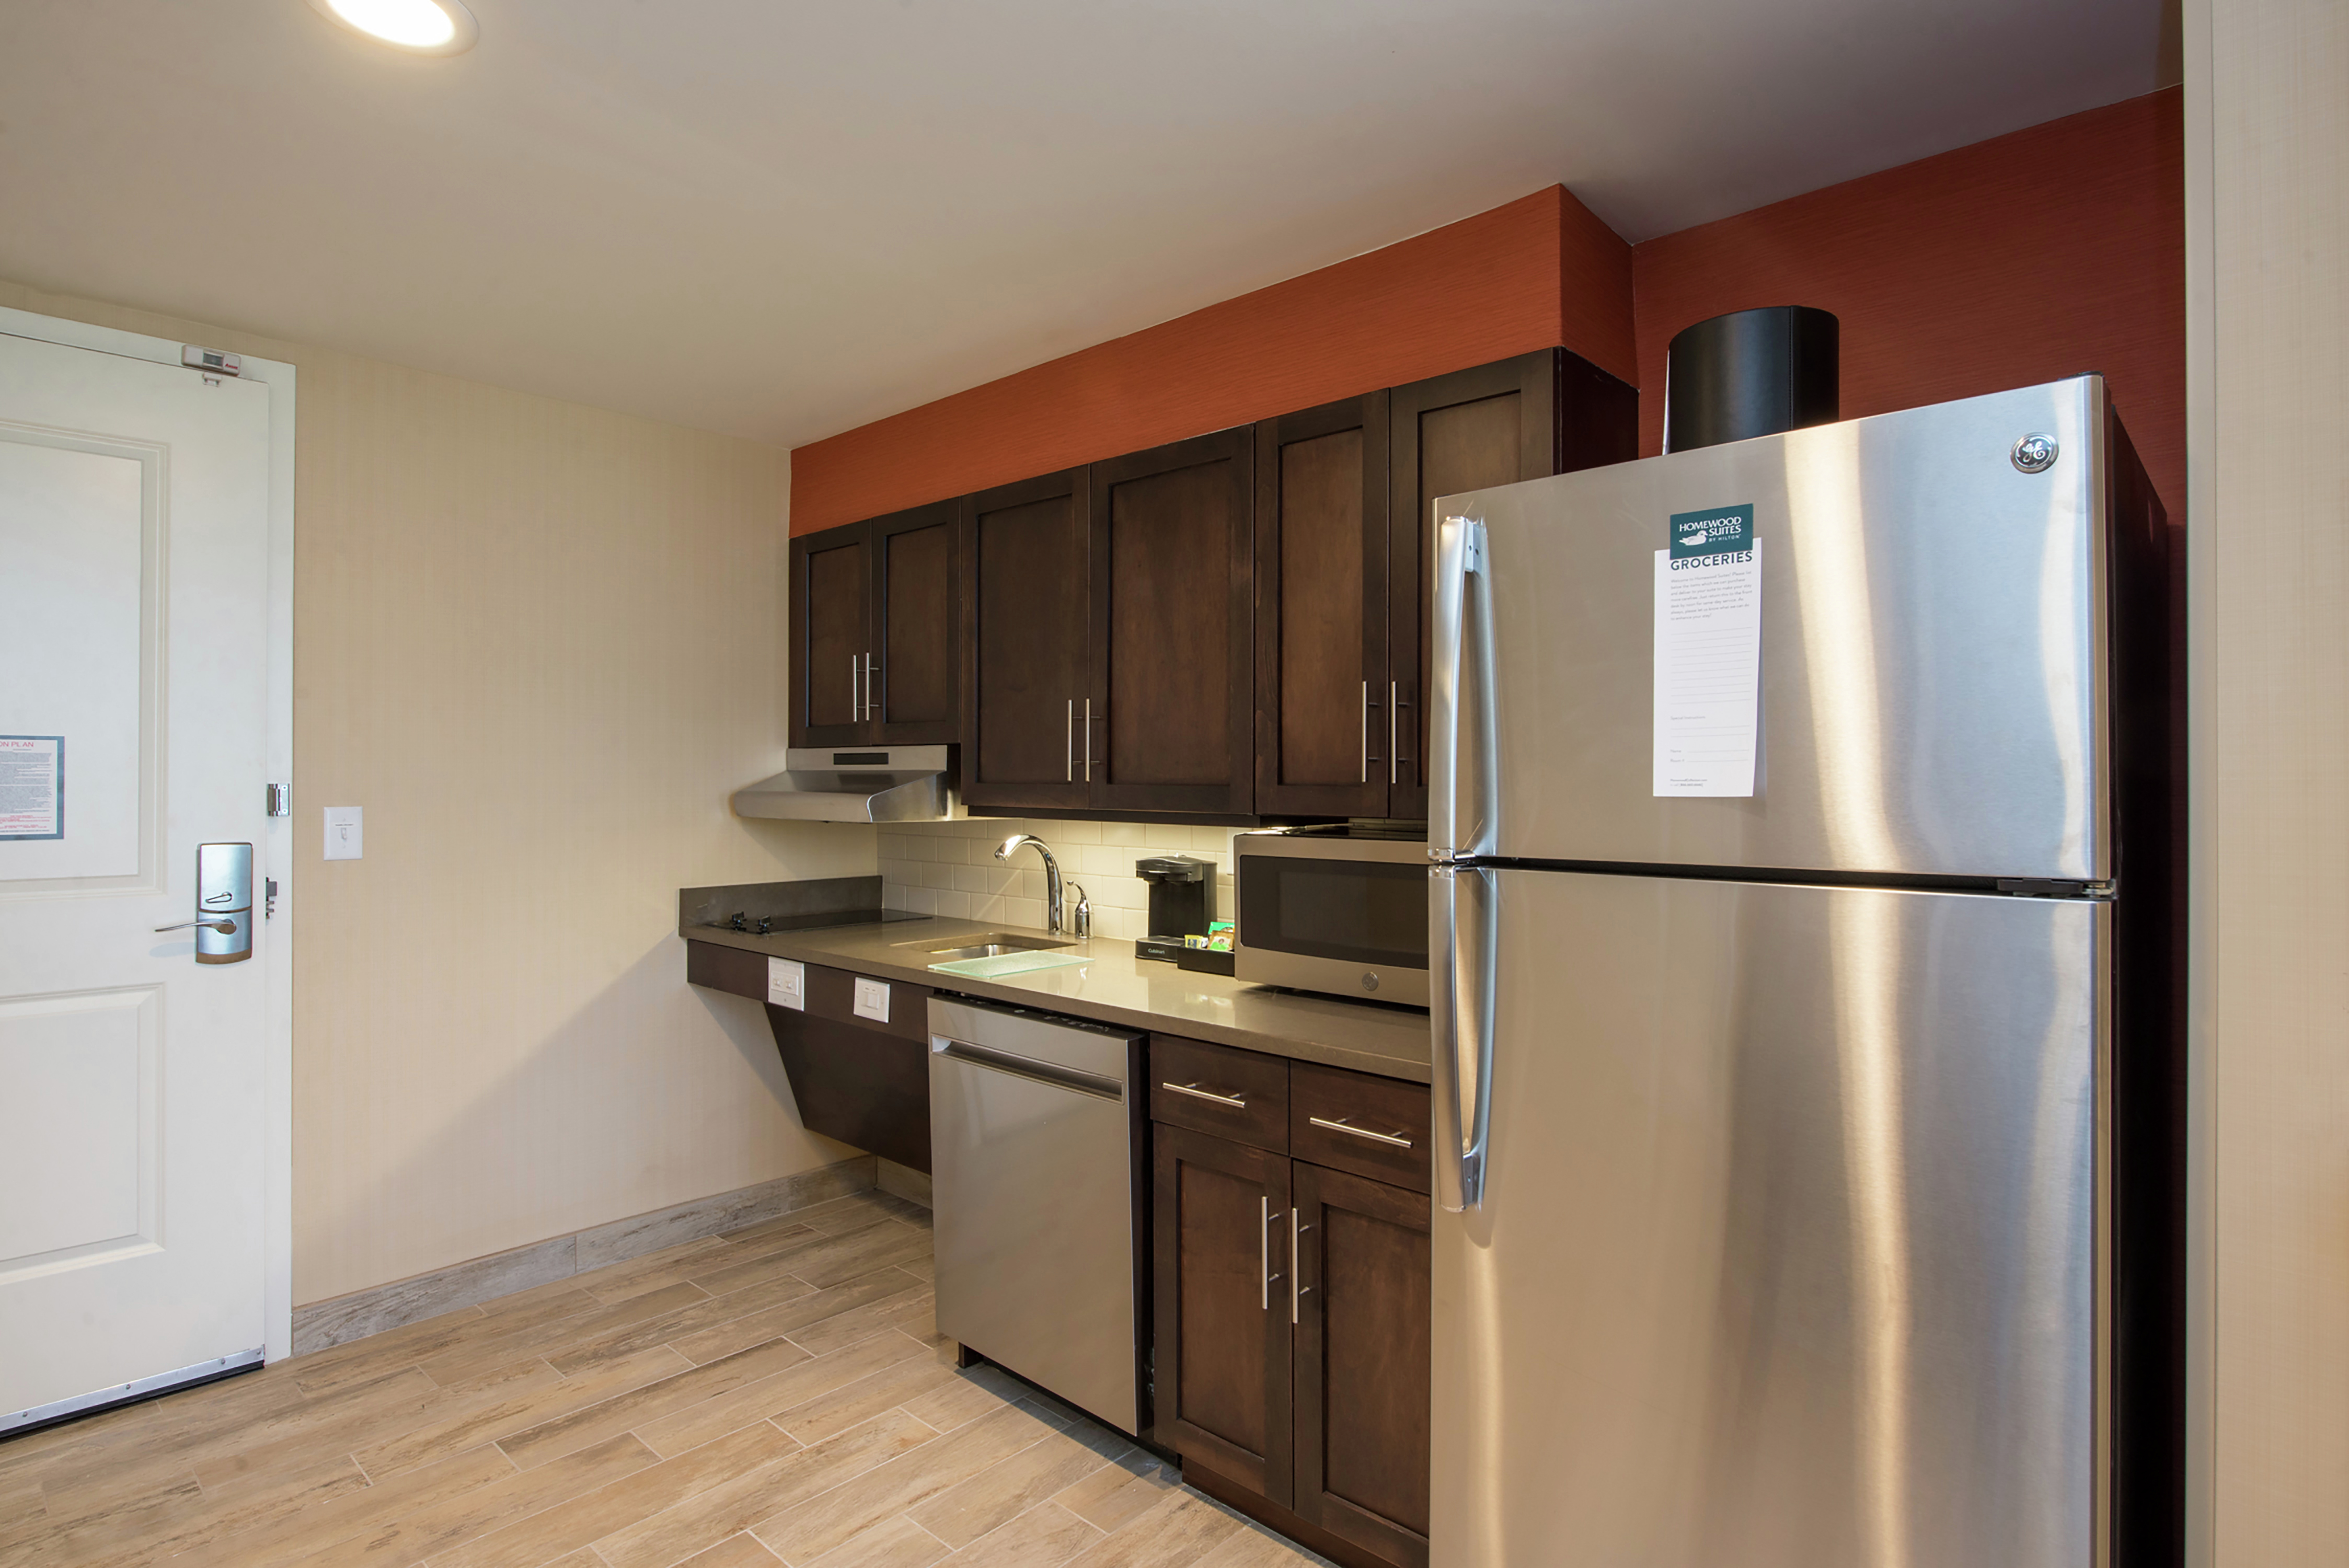 Suite Kitchen Appliances and Entry